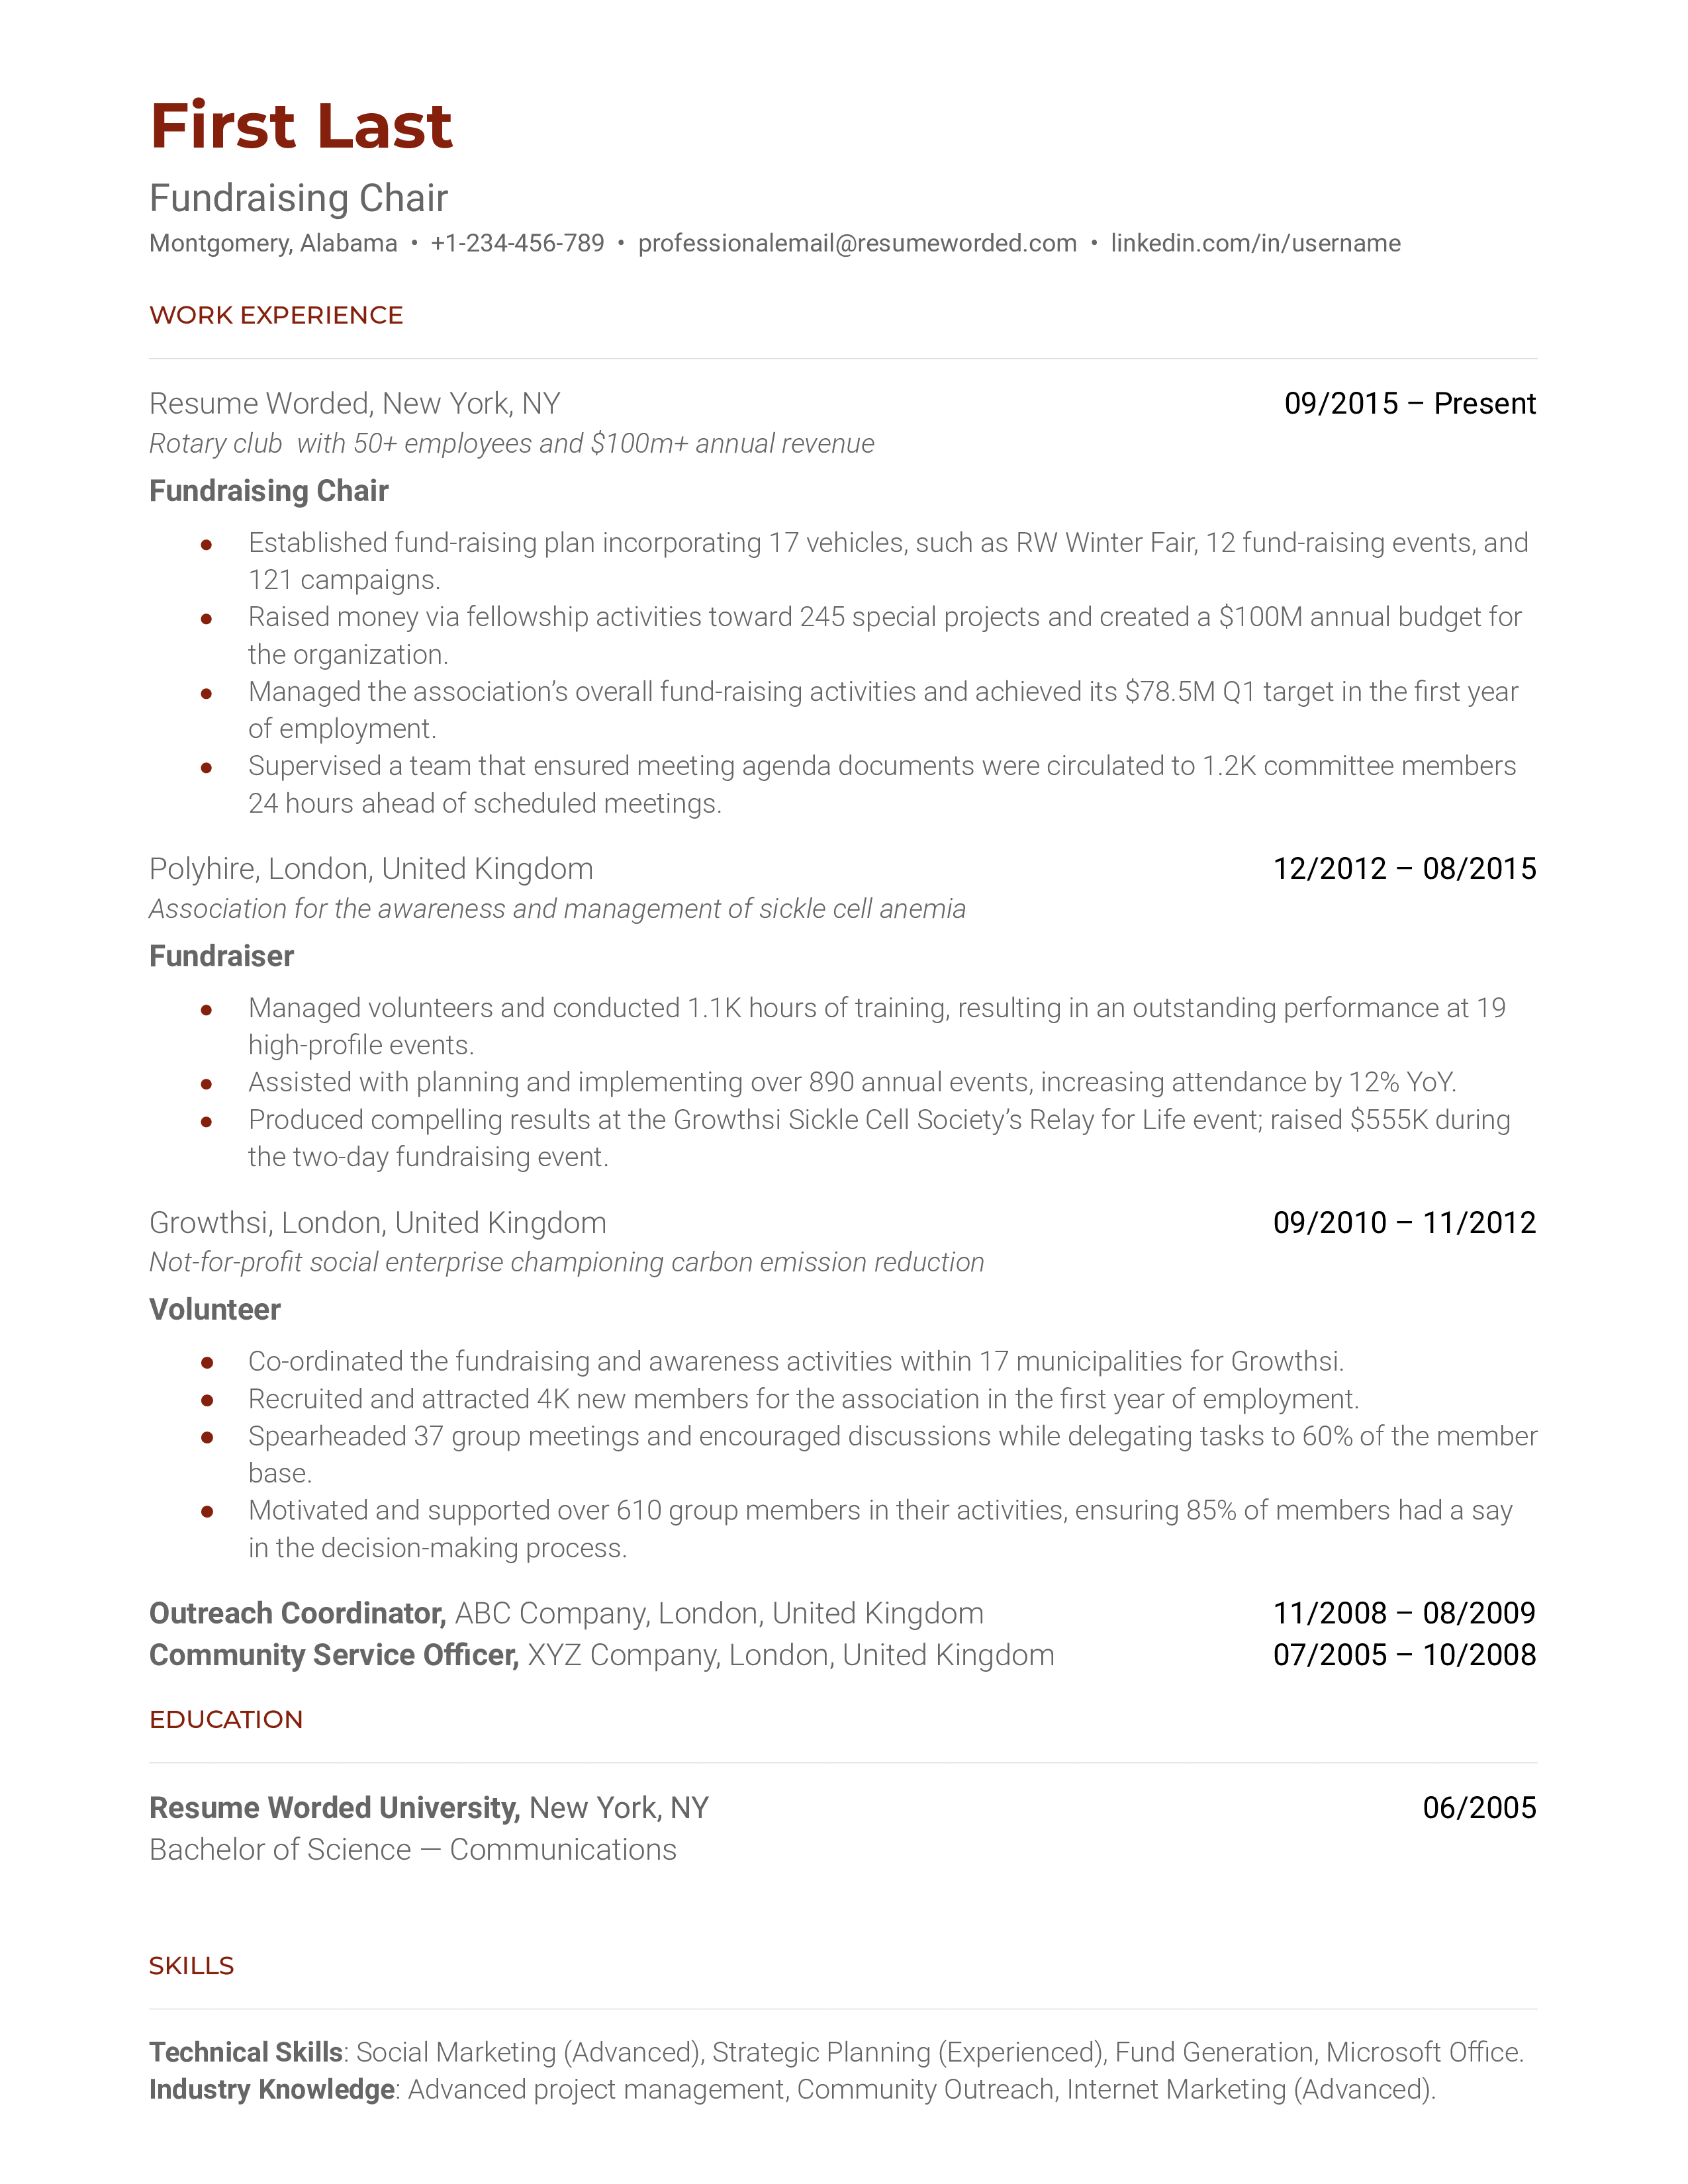 A fundraising chair resume template that emphasizes work experience